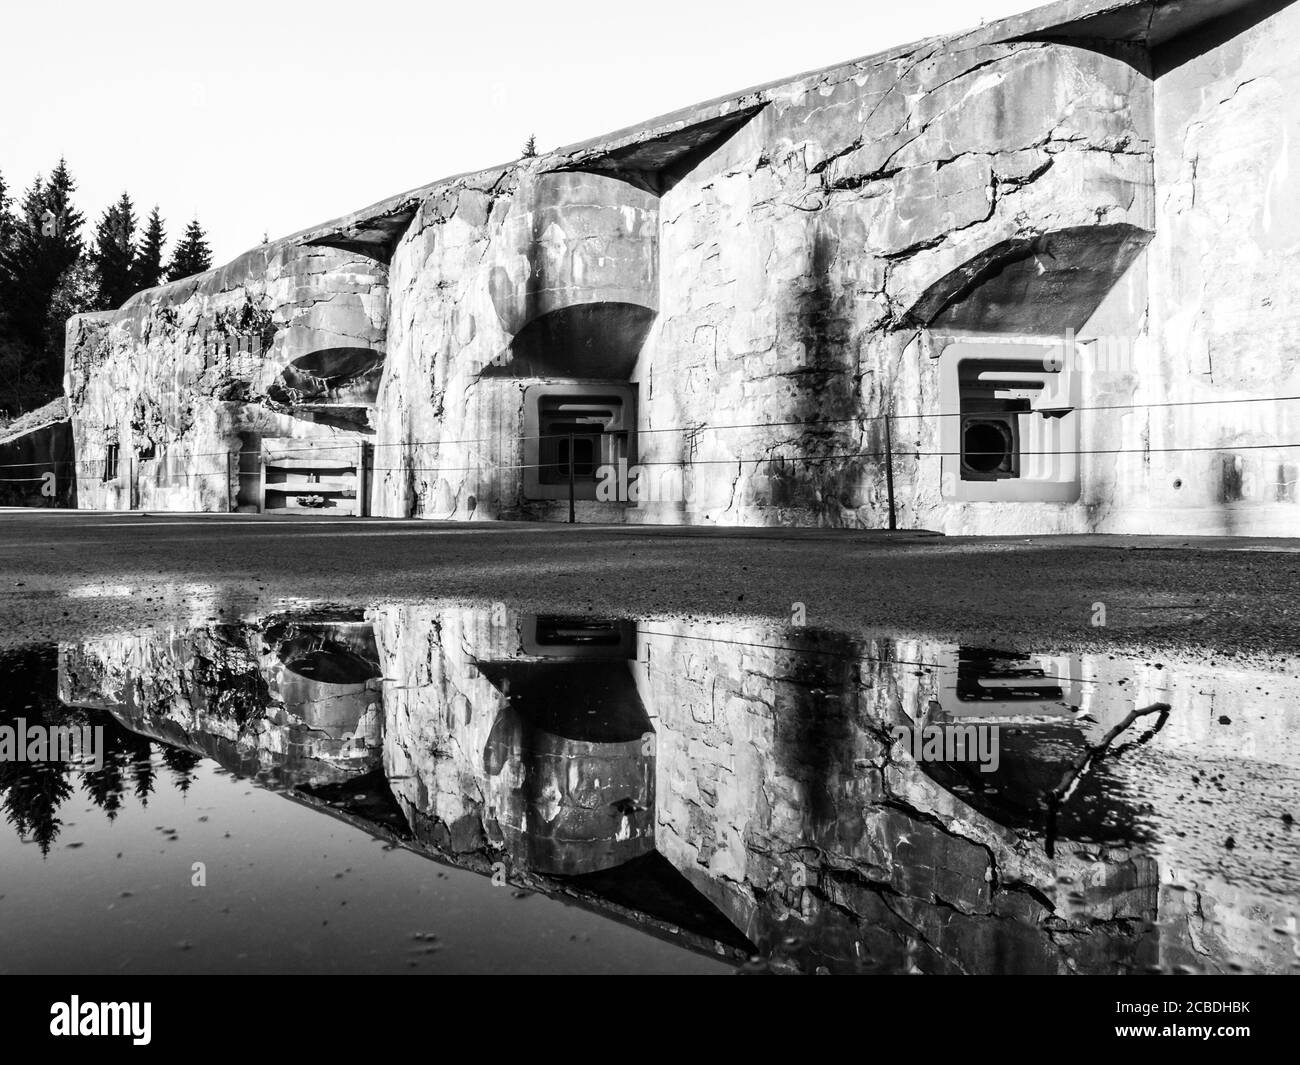 Artillery fortress Hanicka in Orlicke Hory, Czech Republic. Old massive stronghold from World War II. Black and white image. Stock Photo